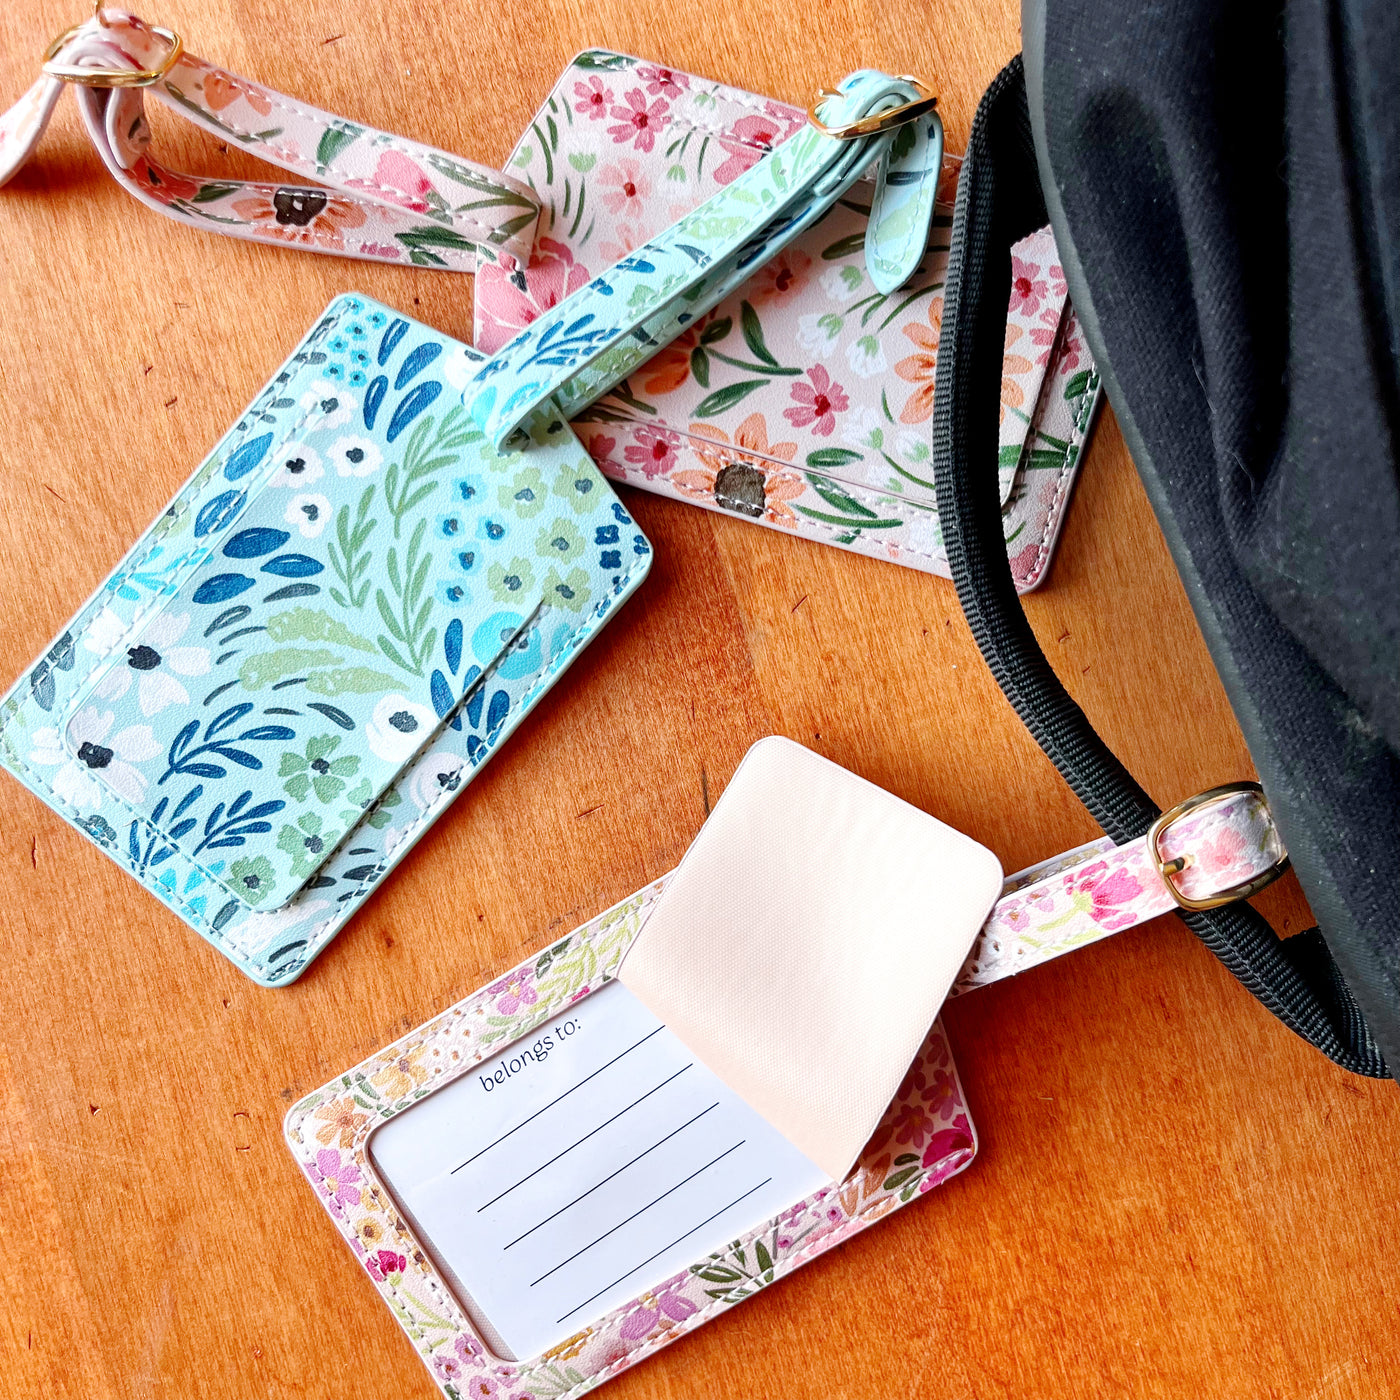 Floral Luggage Tag